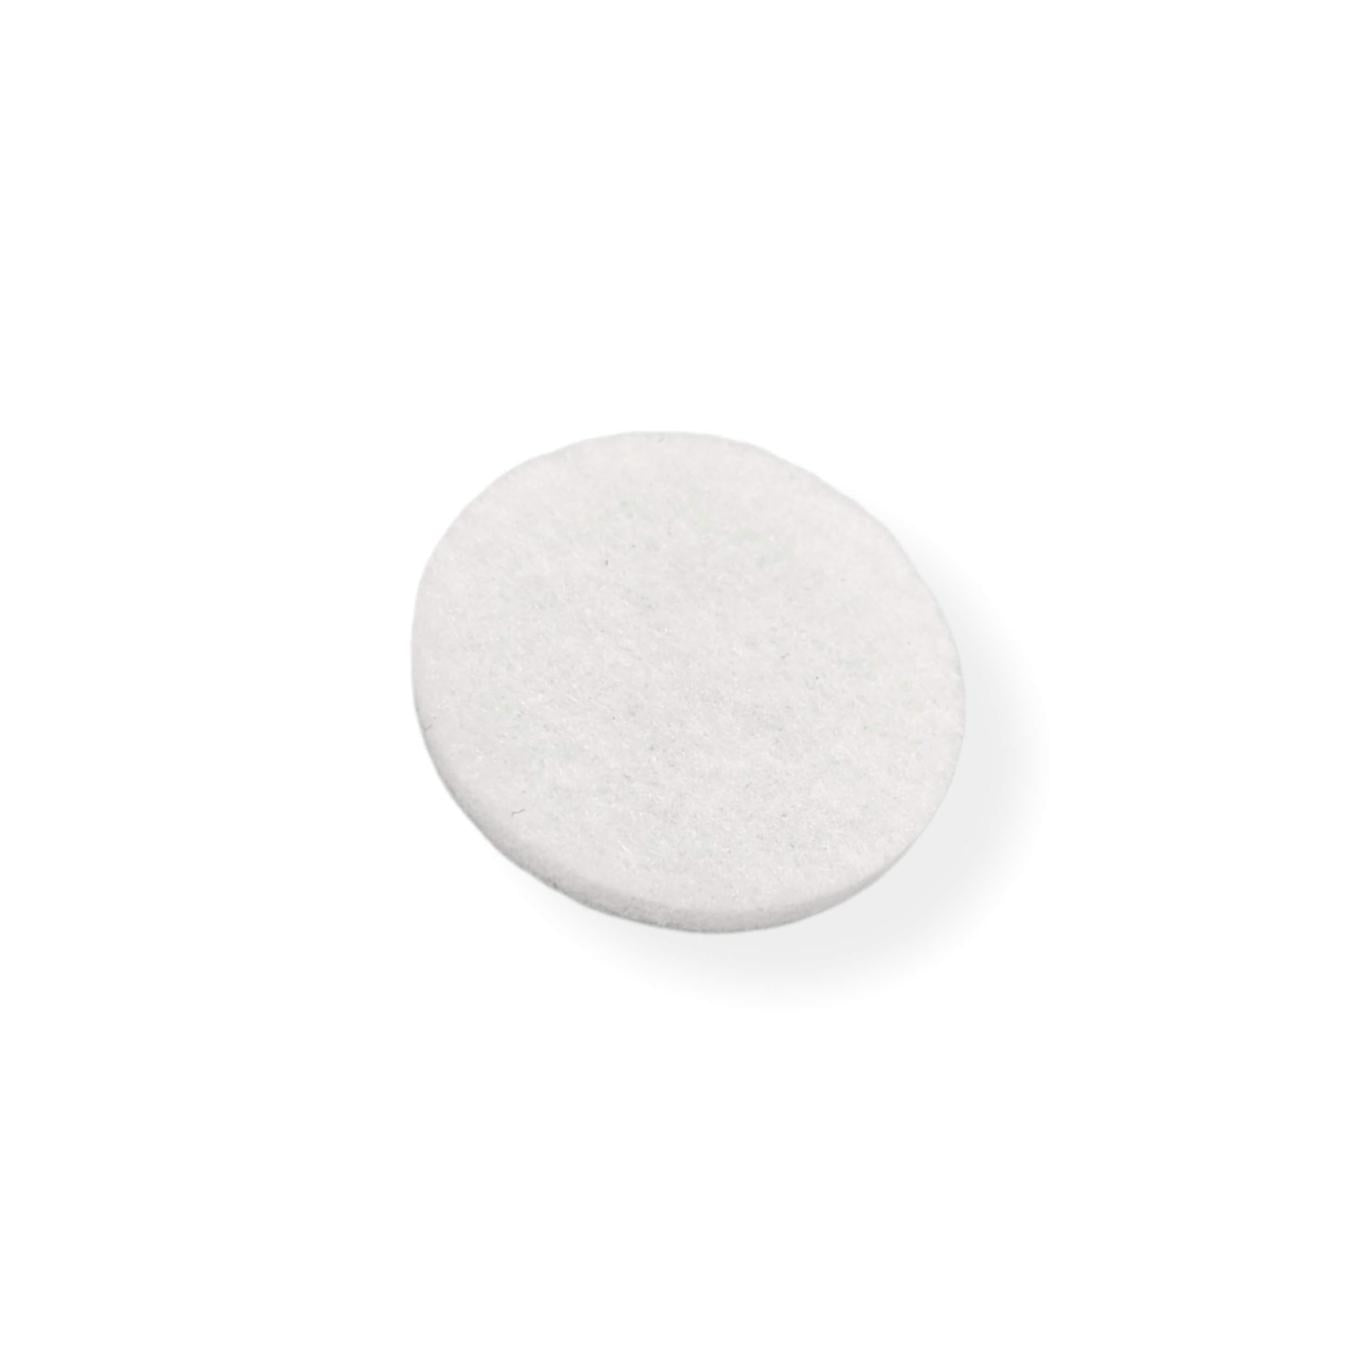 Felt Pads - White Self Adhesive Stick on Felt - Round 30mm Diameter - Made in Germany - Keay Vital Parts